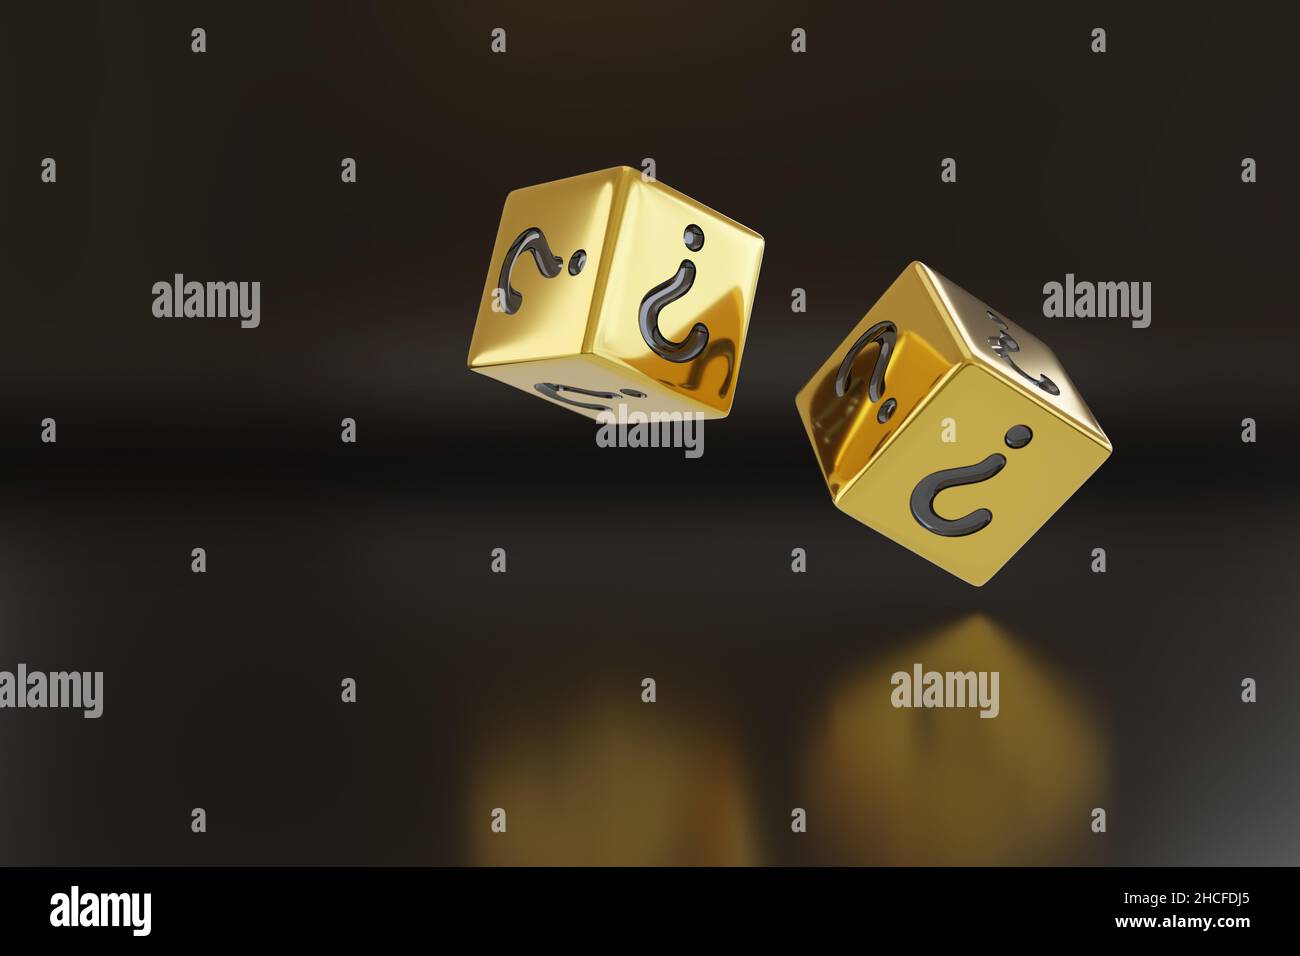 Two rolling golden dice with question marks on their faces isolated on dark background. Random concept. 3d illustration. Stock Photo